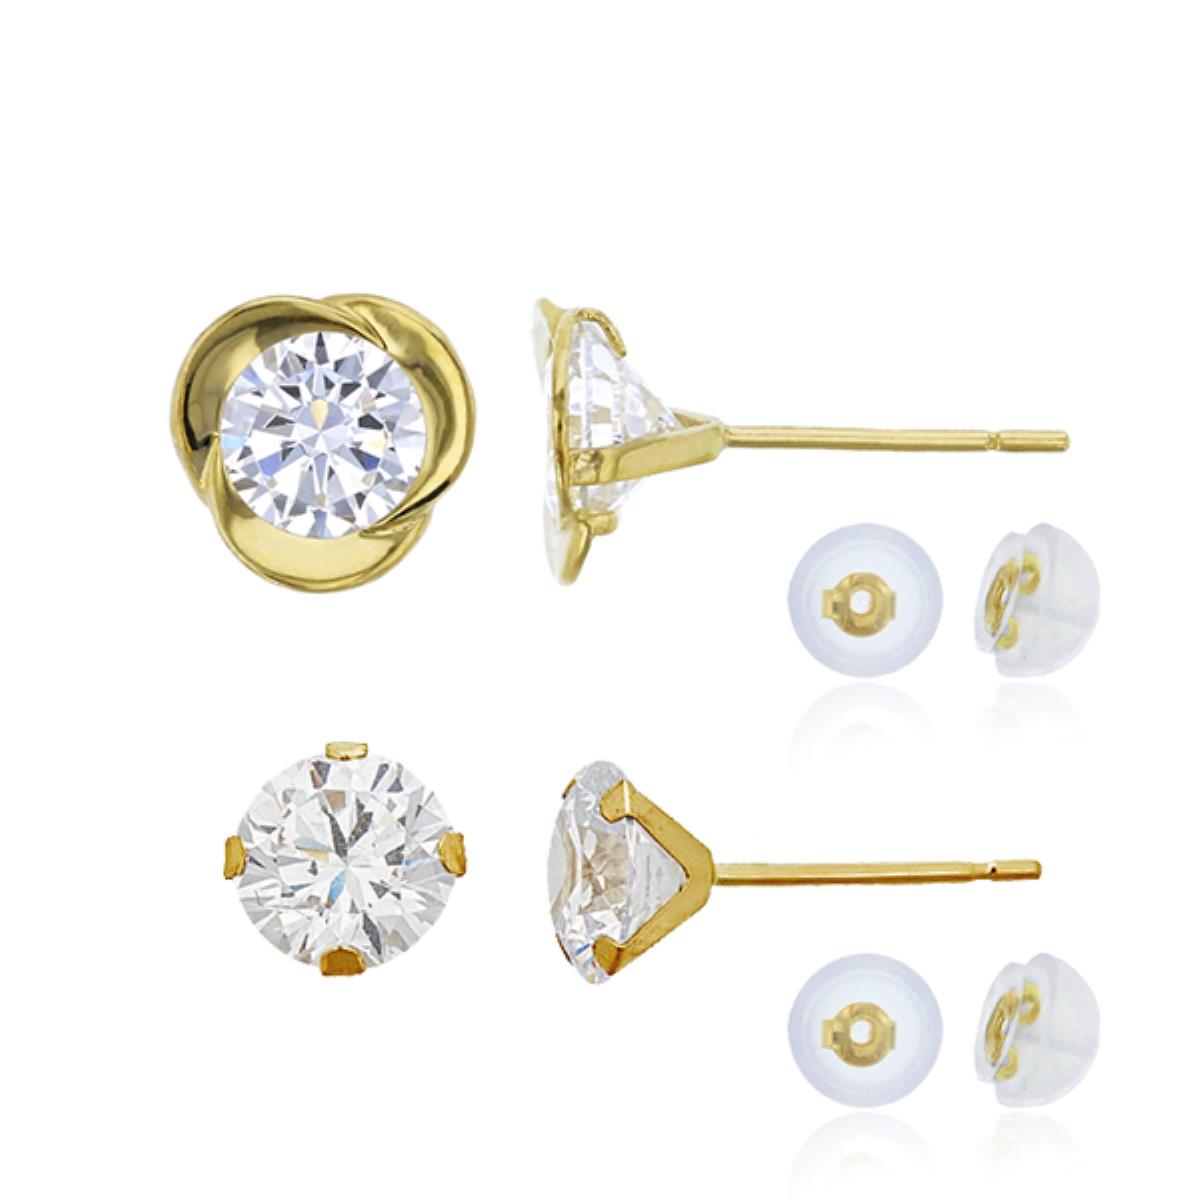 14K Yellow Gold 5mm Rd Celtic & 8mm Rd Martini Solitaire Stud Earring Set